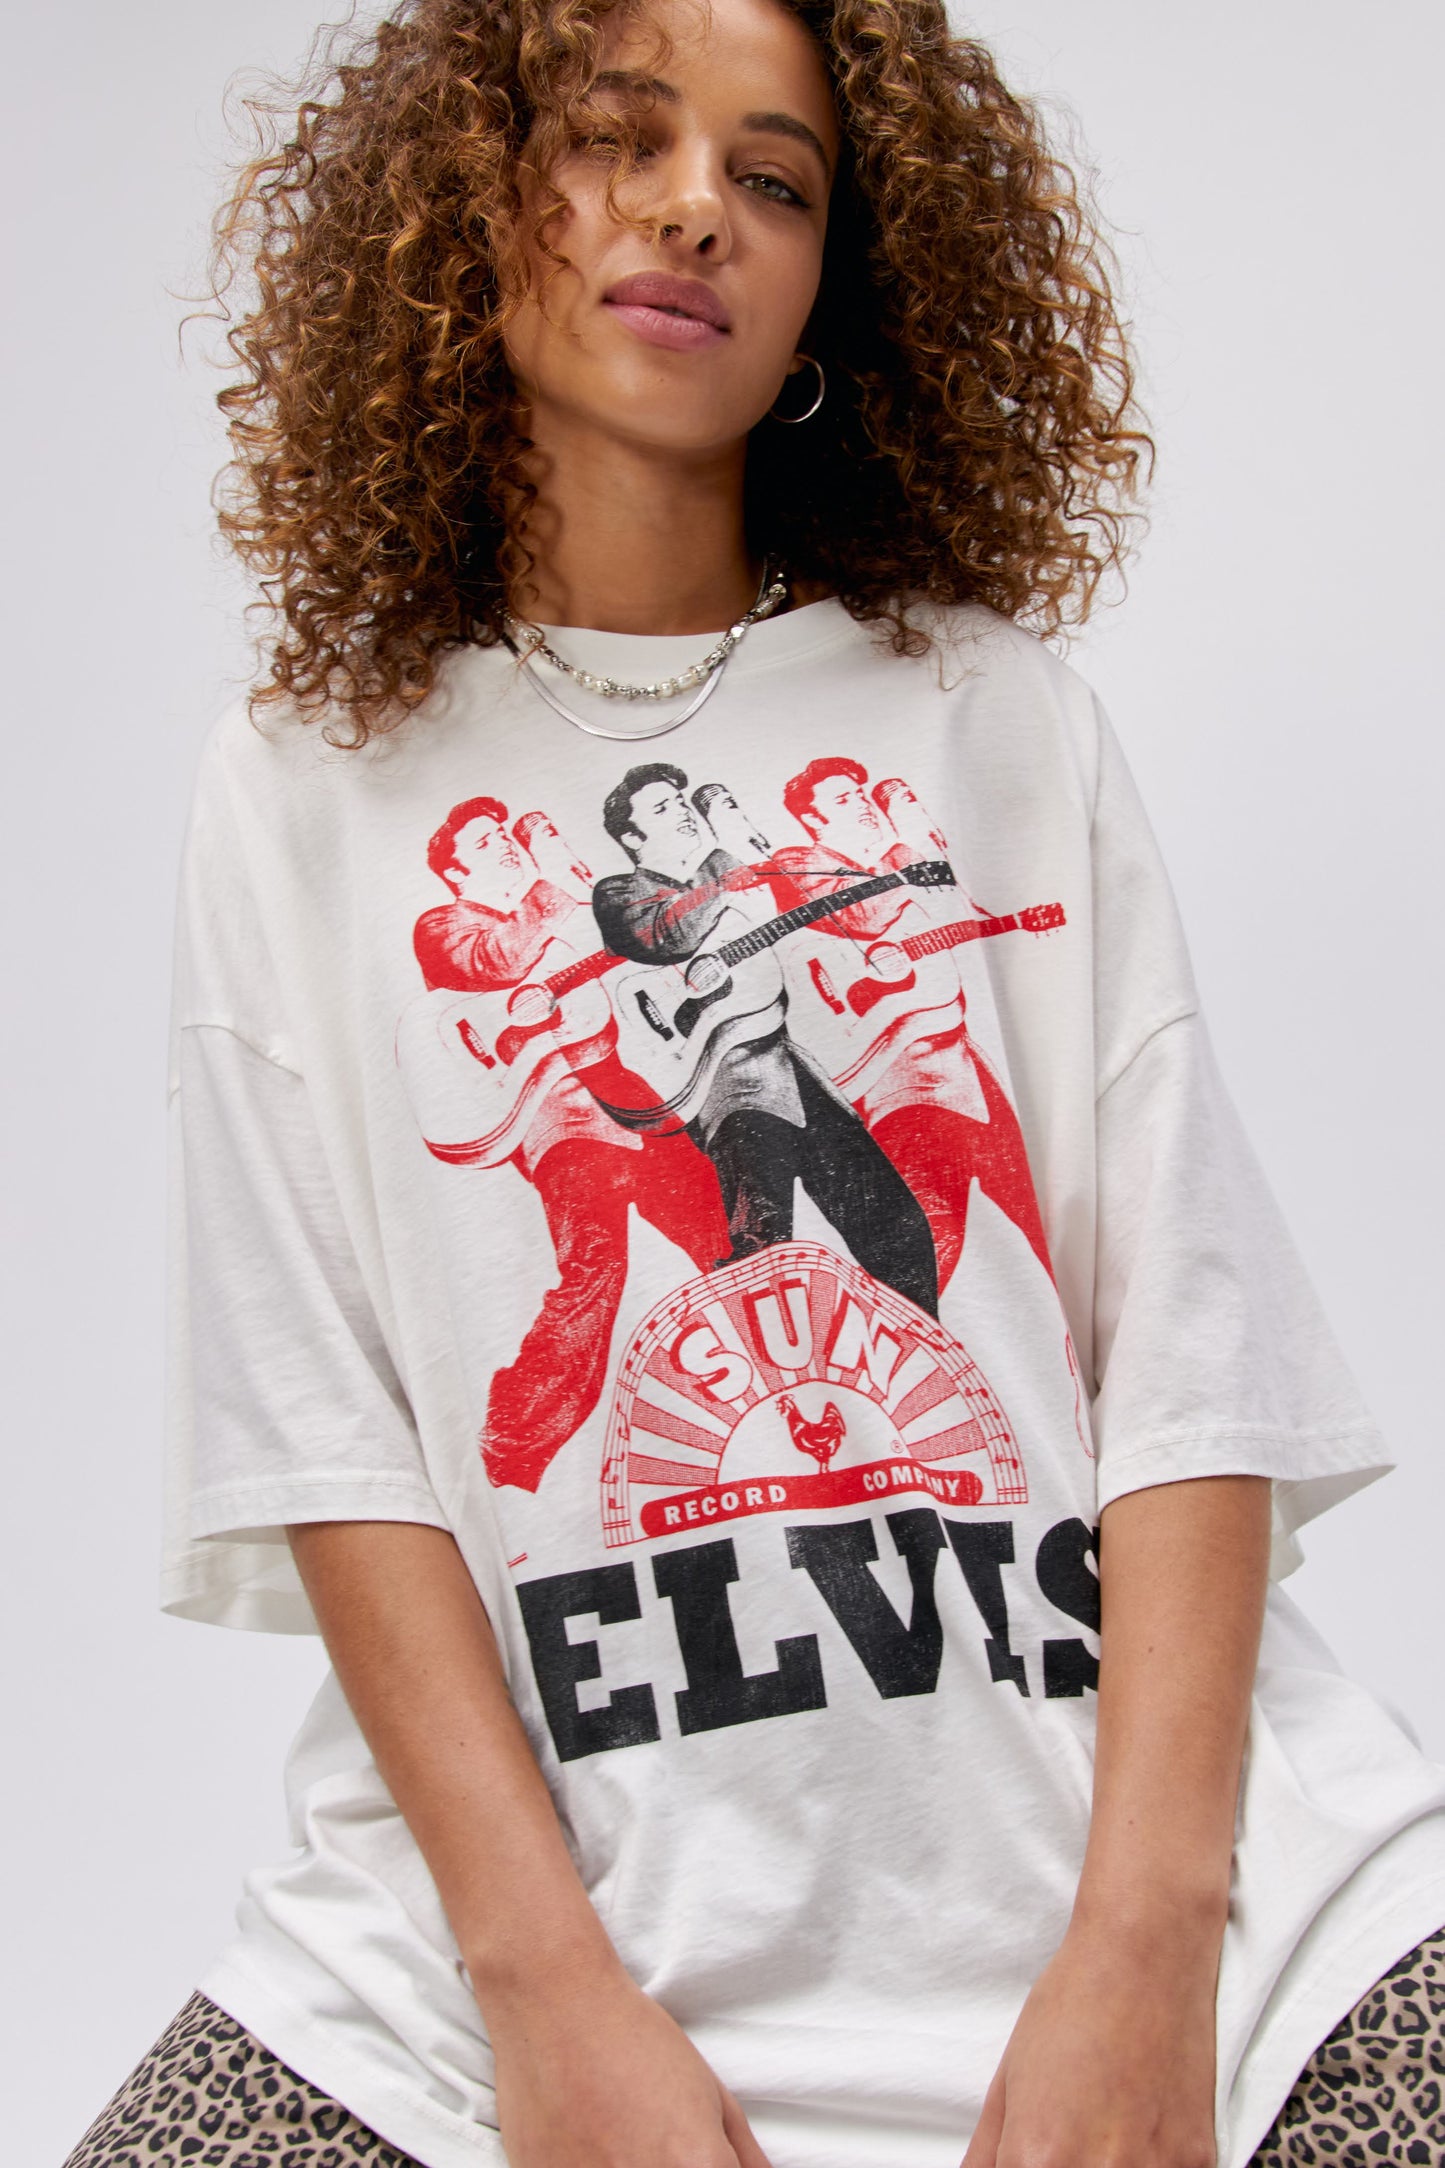 A curly-haired model featuring a white tee stamped with the legendary artist's name and his iconic portrait in red and black inks.